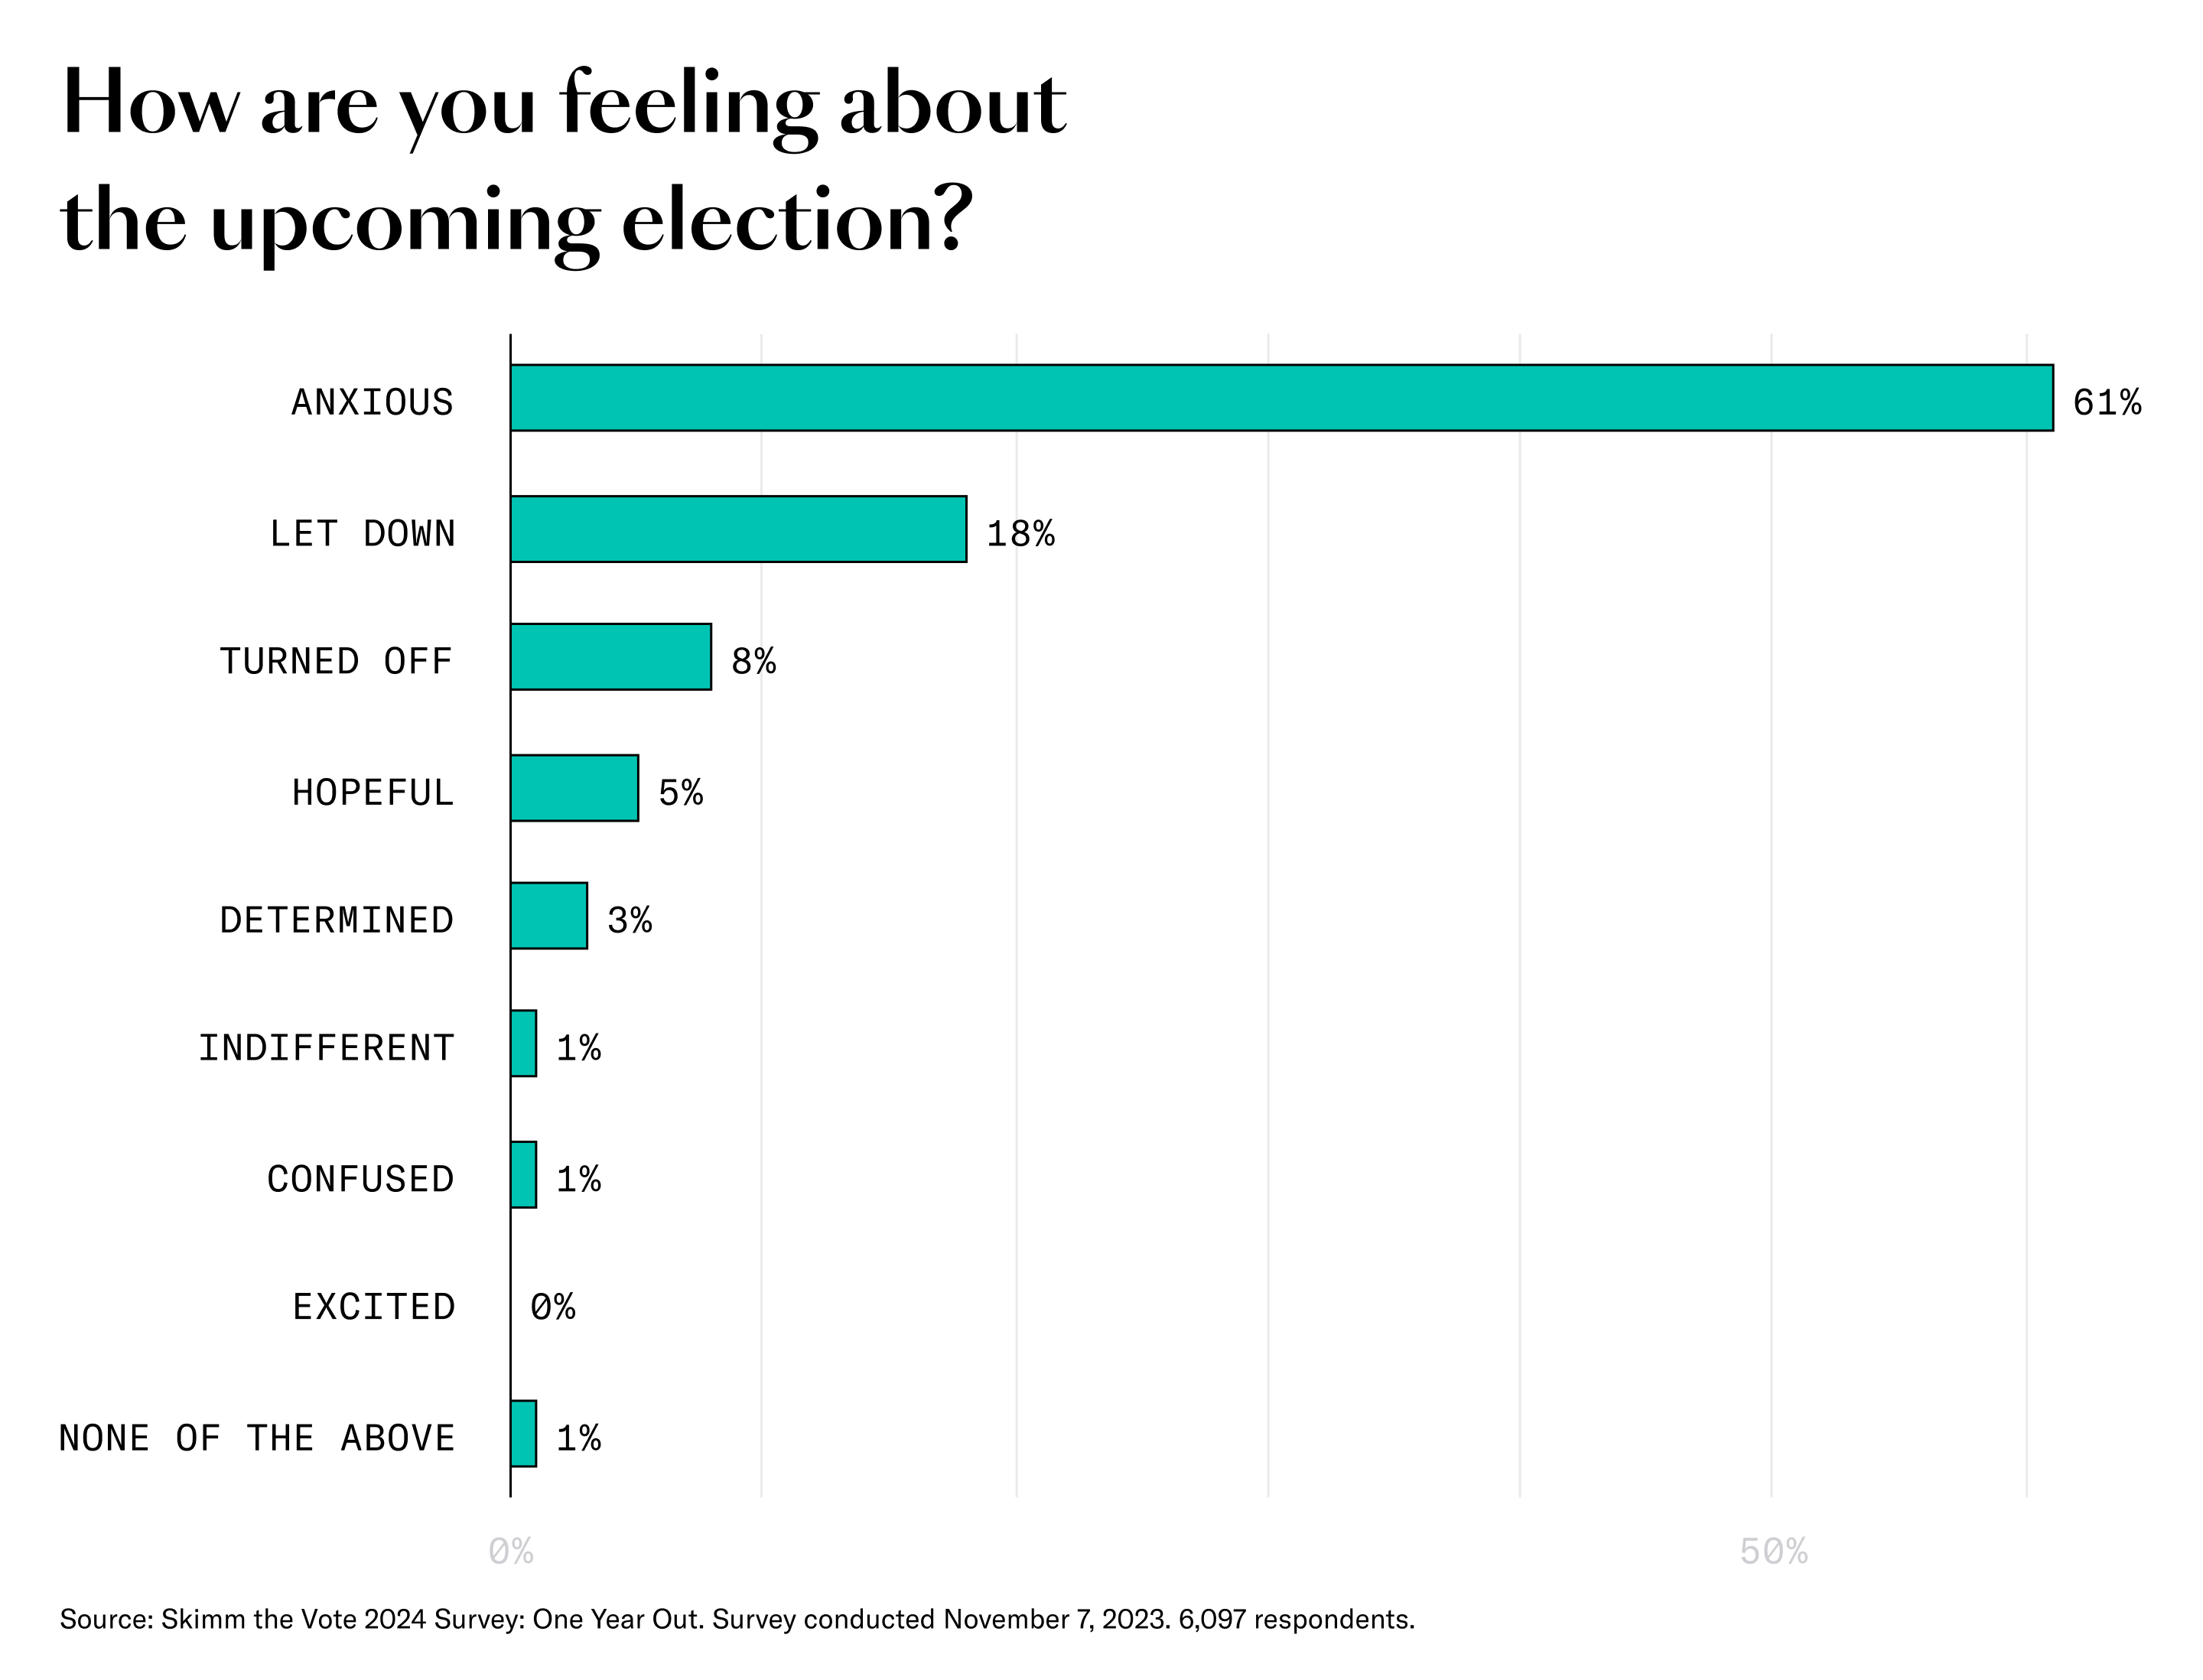 Most Skimm'rs feel anxious ahead of the 2024 election.